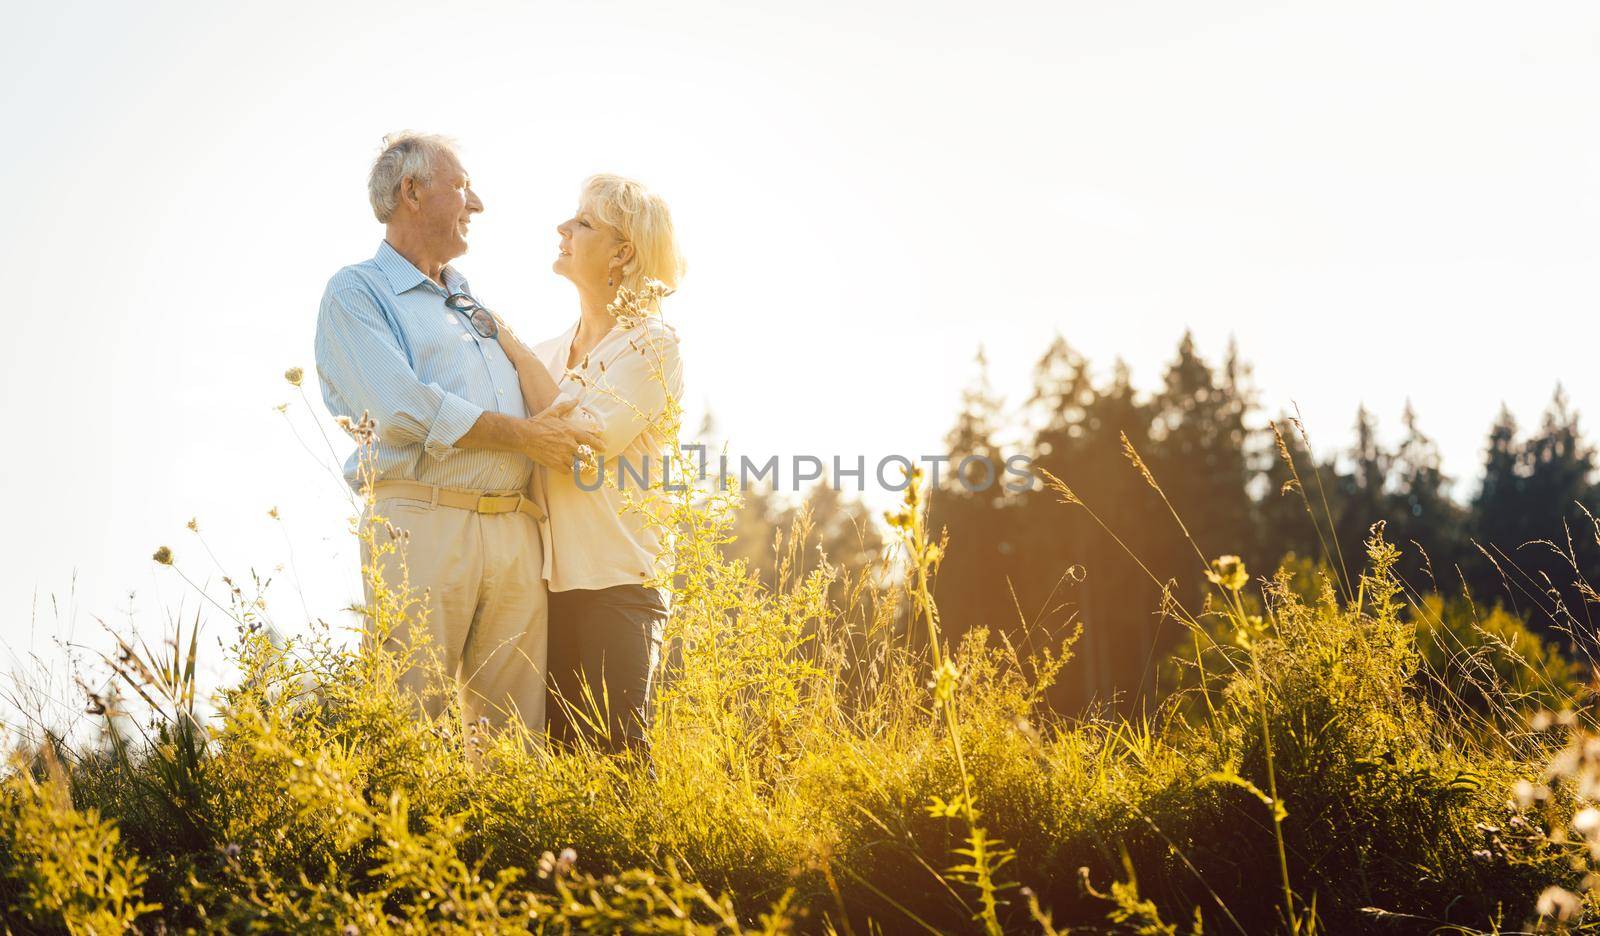 Senior woman and man hugging still being in love in a romantic setting